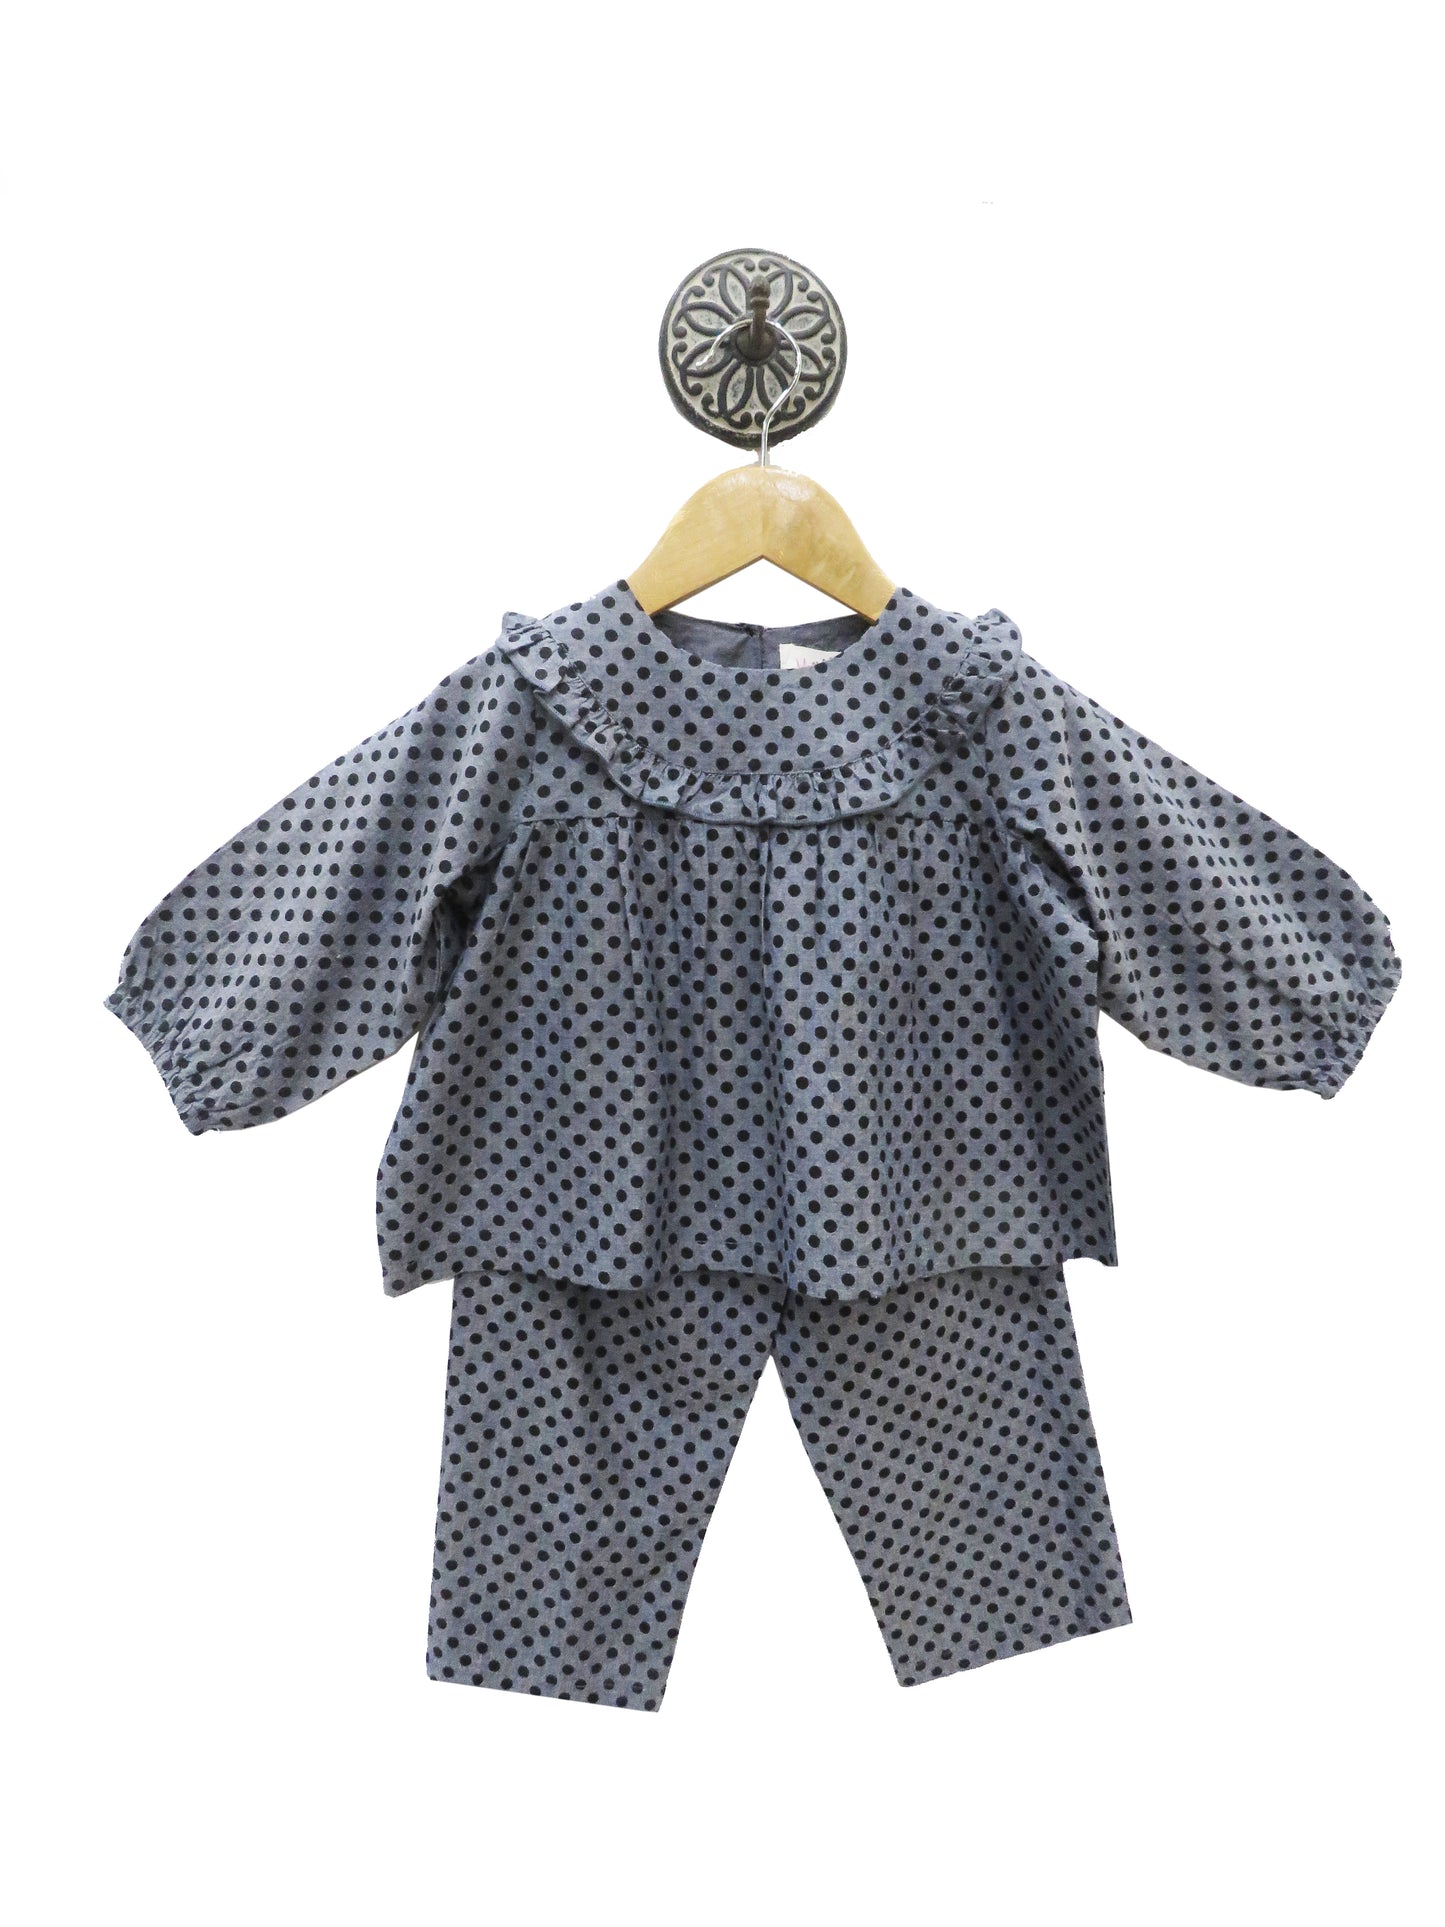 GREY POLKA DOTTED NIGHTSUIT SET WITH FRILLS ON THE YOKE